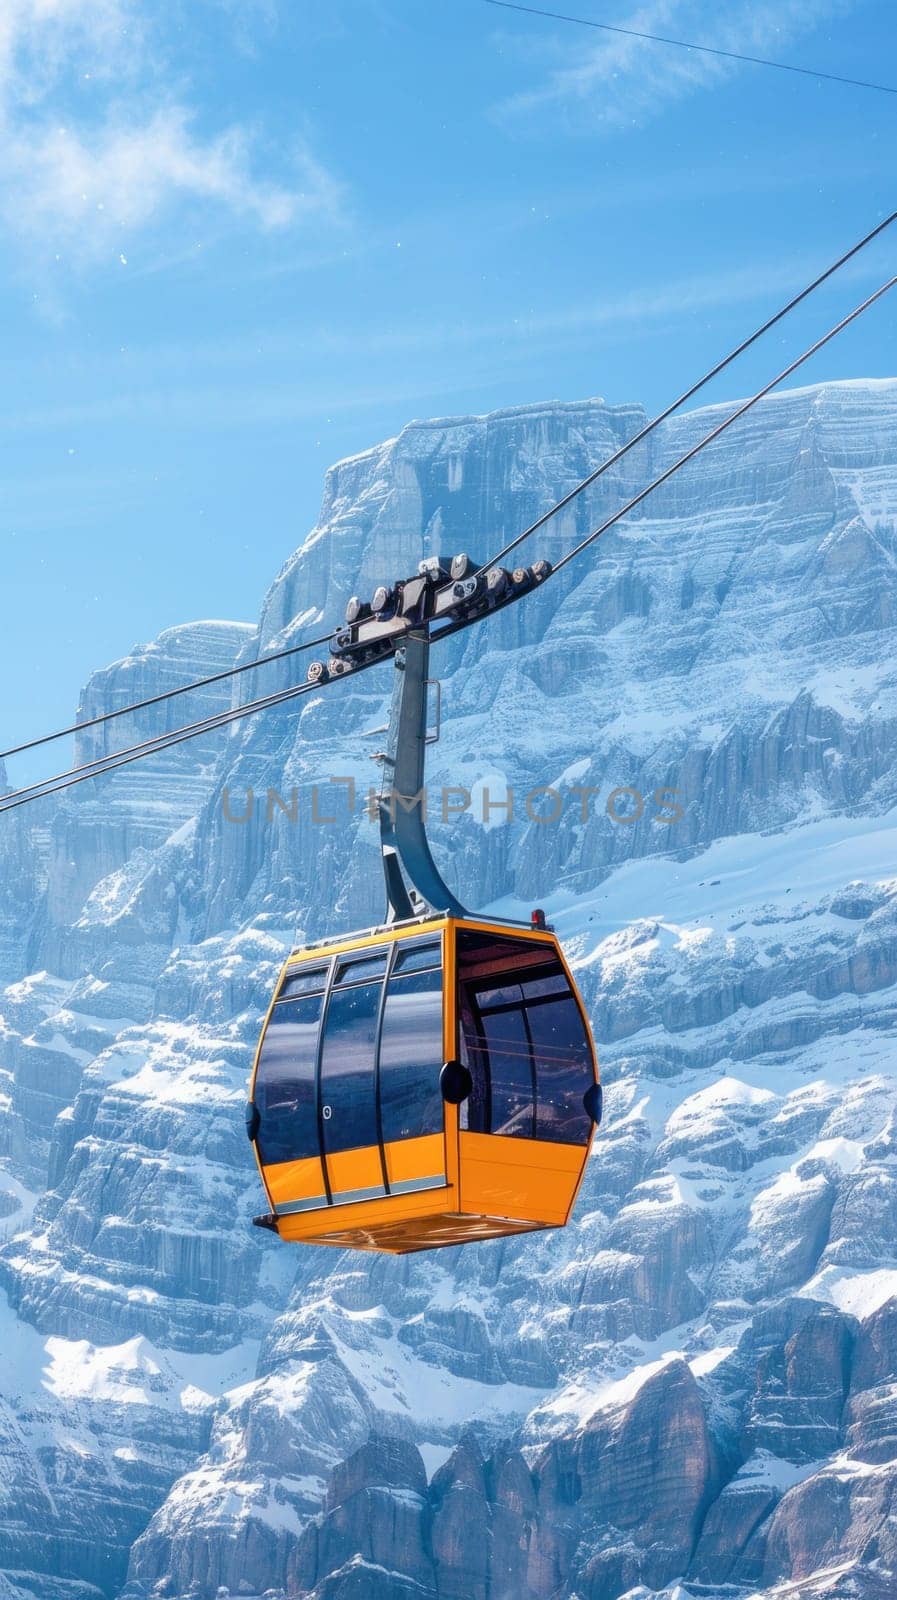 A vibrant yellow cable car smoothly travels through a snowy mountain landscape under a beautiful sky